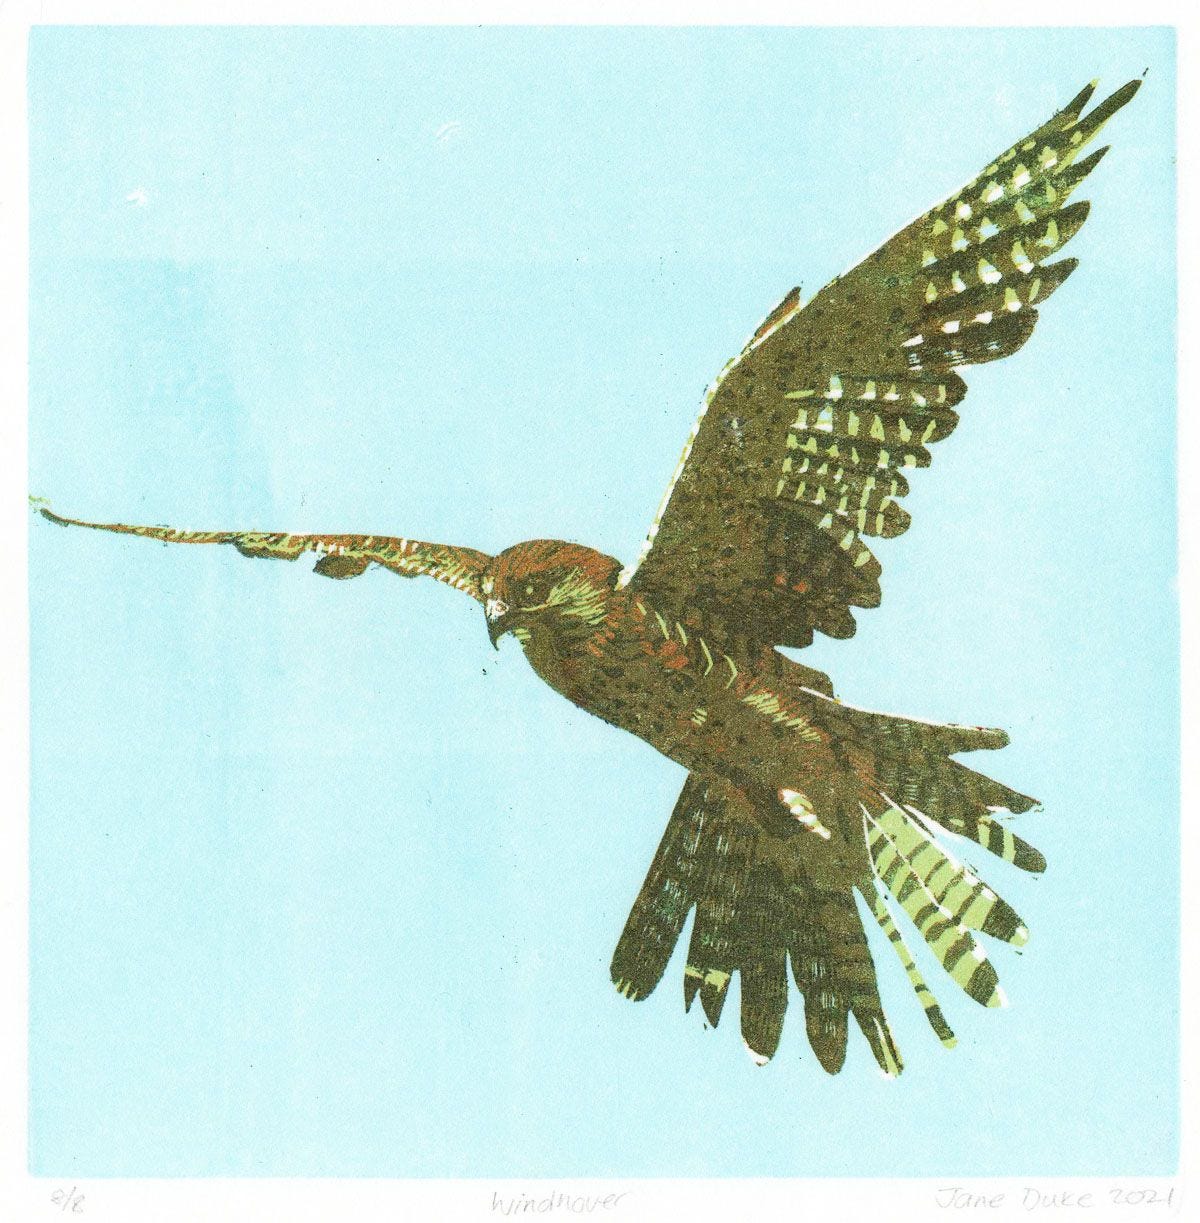 A kestrel, tail feathers splayed, in mid-hover.